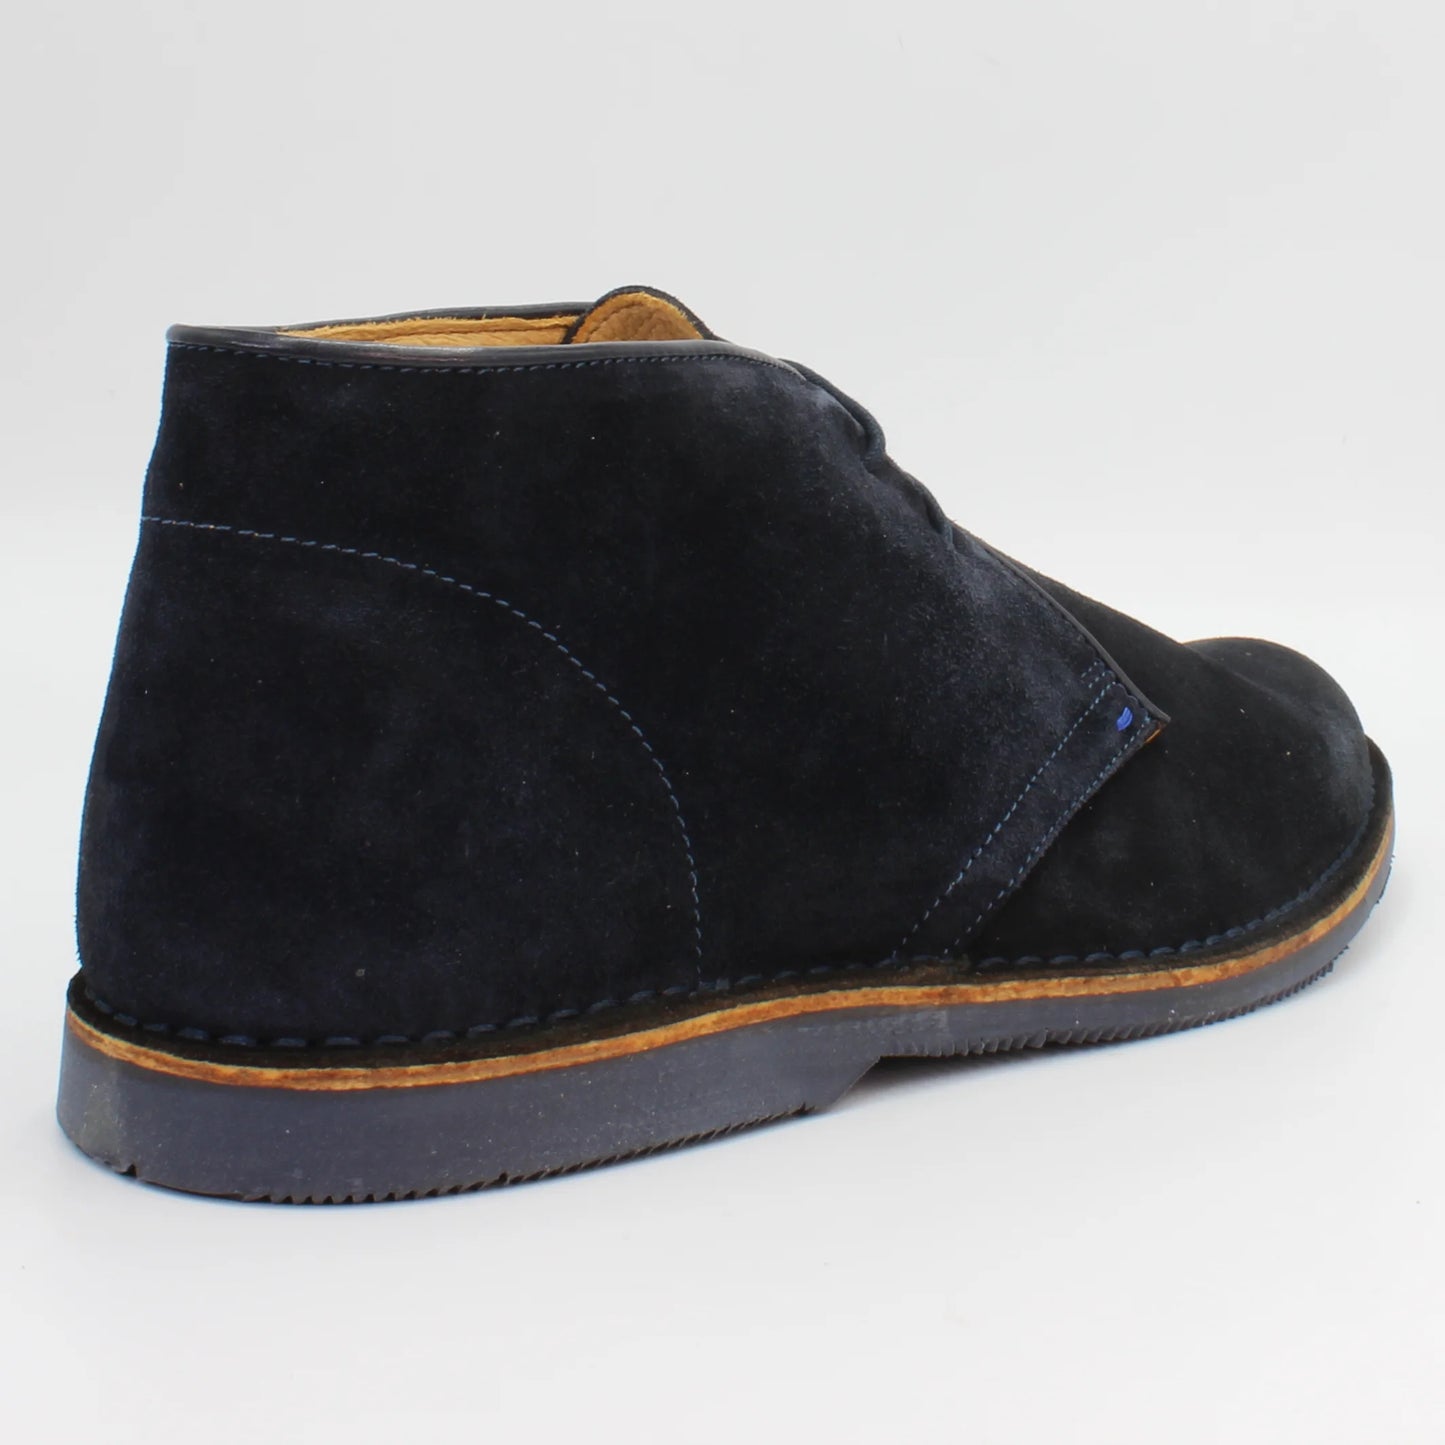 men's genuine suede leather casual desert boot in navy made in Italy by Aliverti